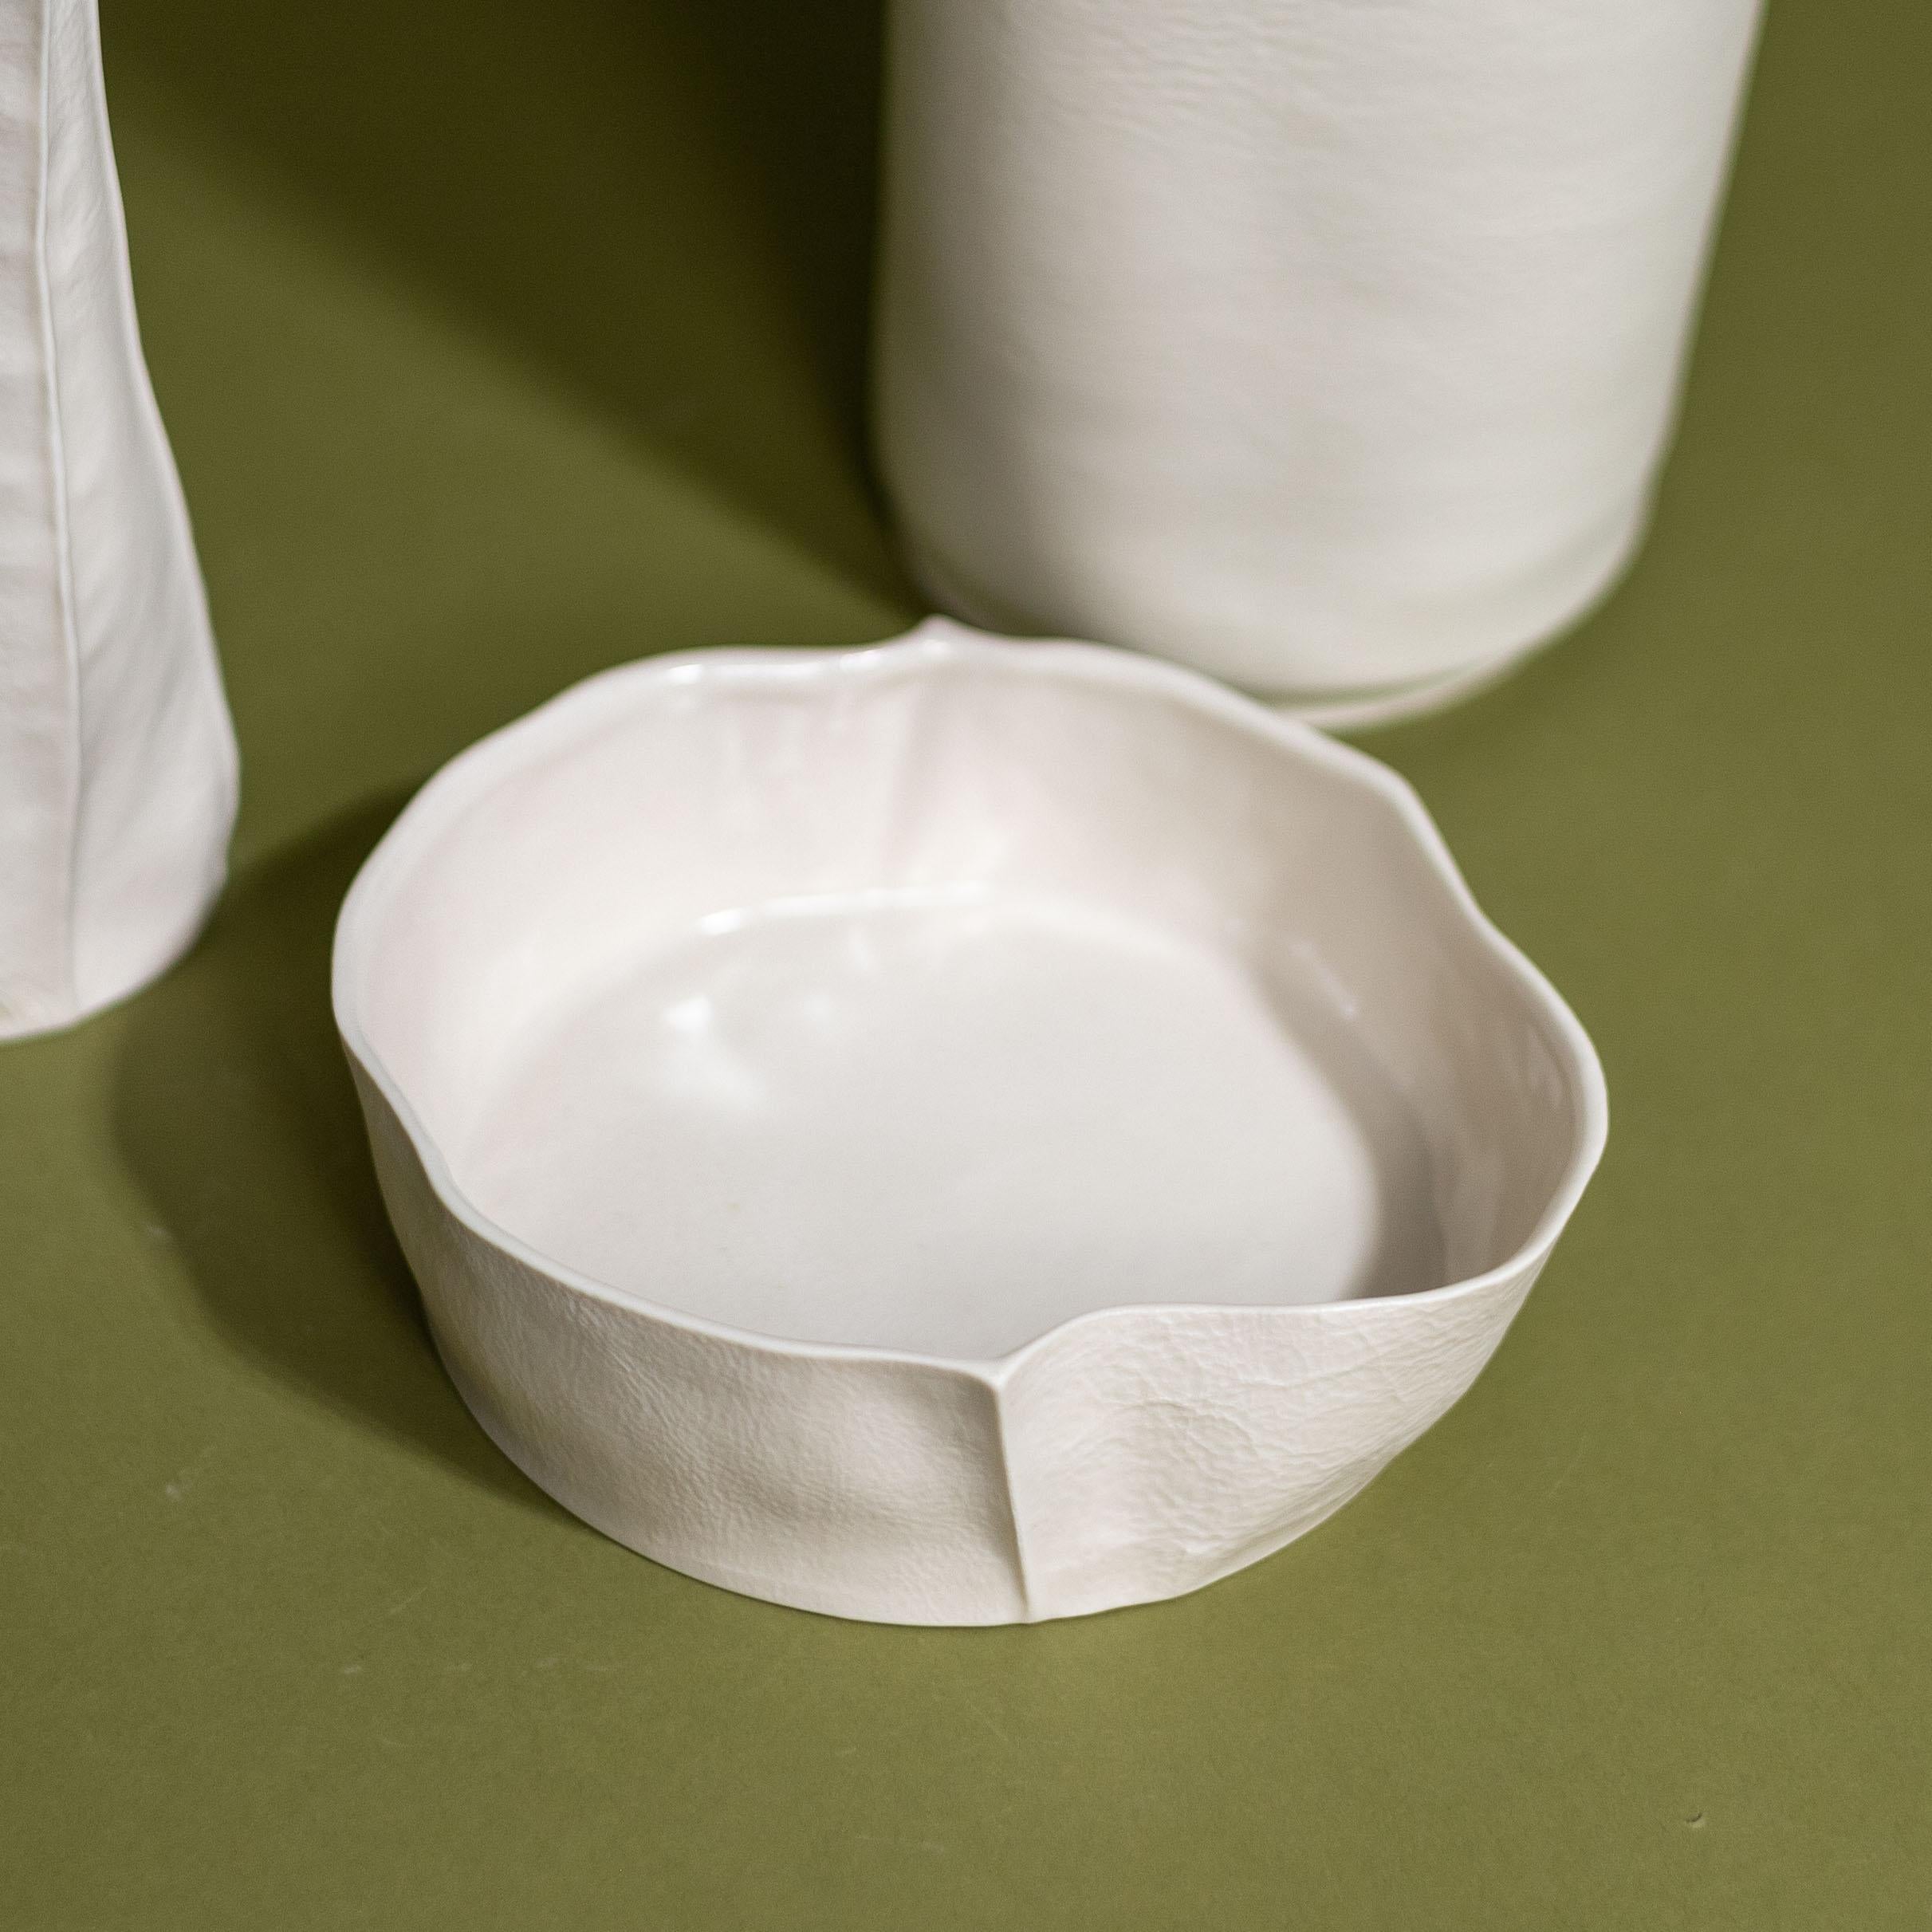 In-Stock, Set of 3 White Ceramic Vases & Dish, Luft Tanaka, Porcelain, Organic In New Condition For Sale In Brooklyn, NY